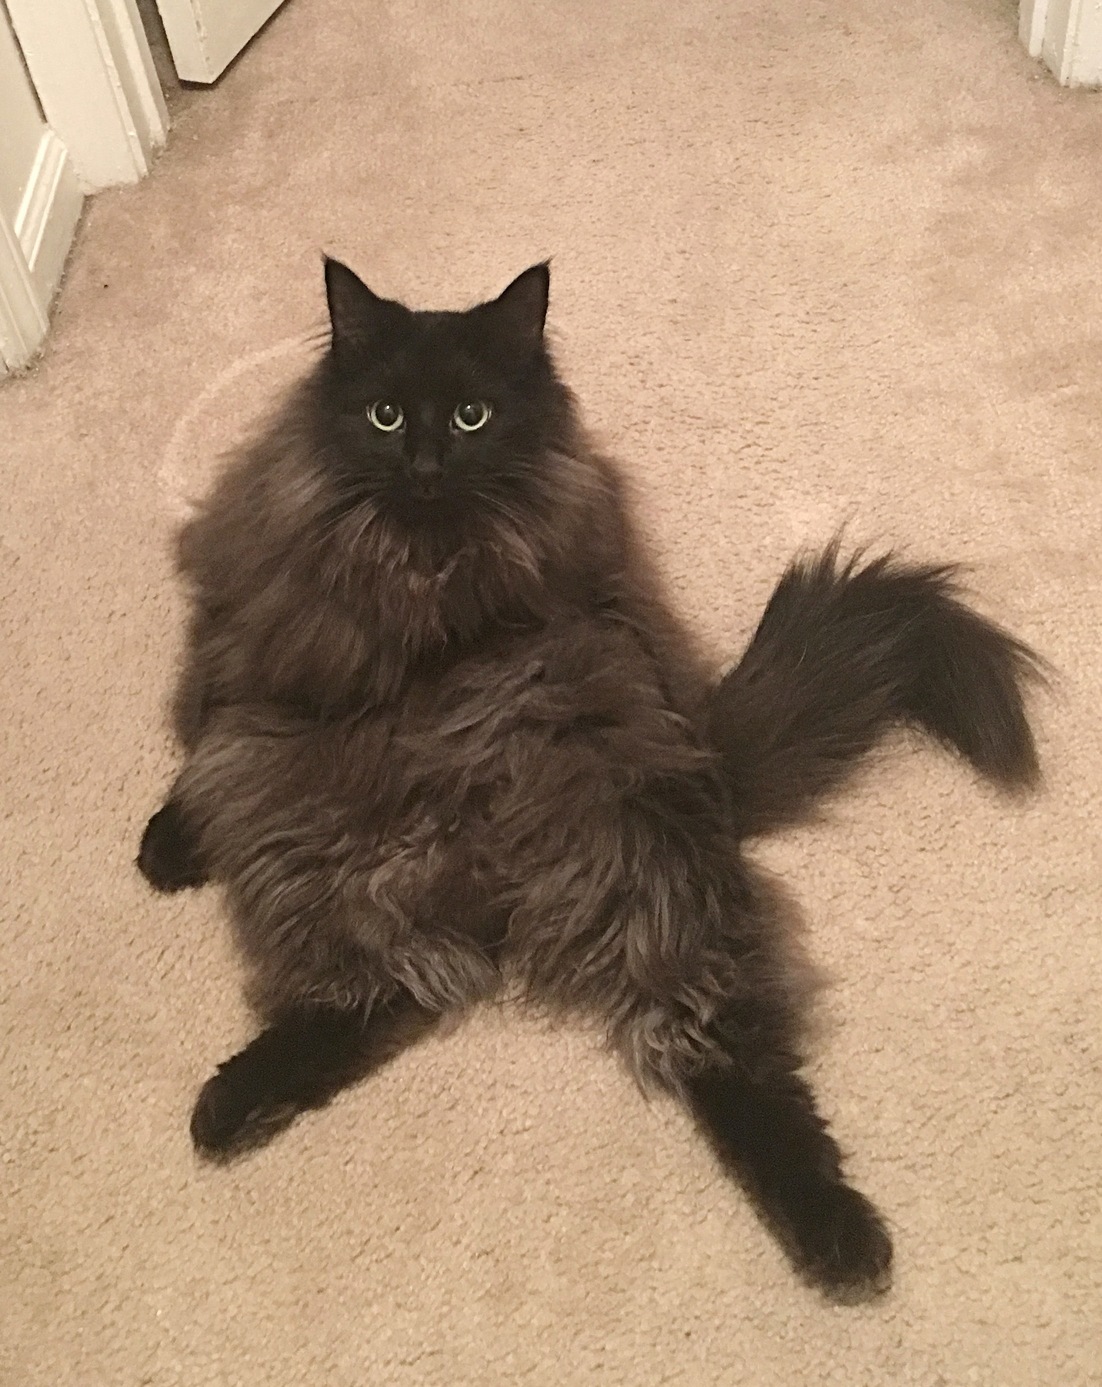 Doodles is not shy about showing off his floof